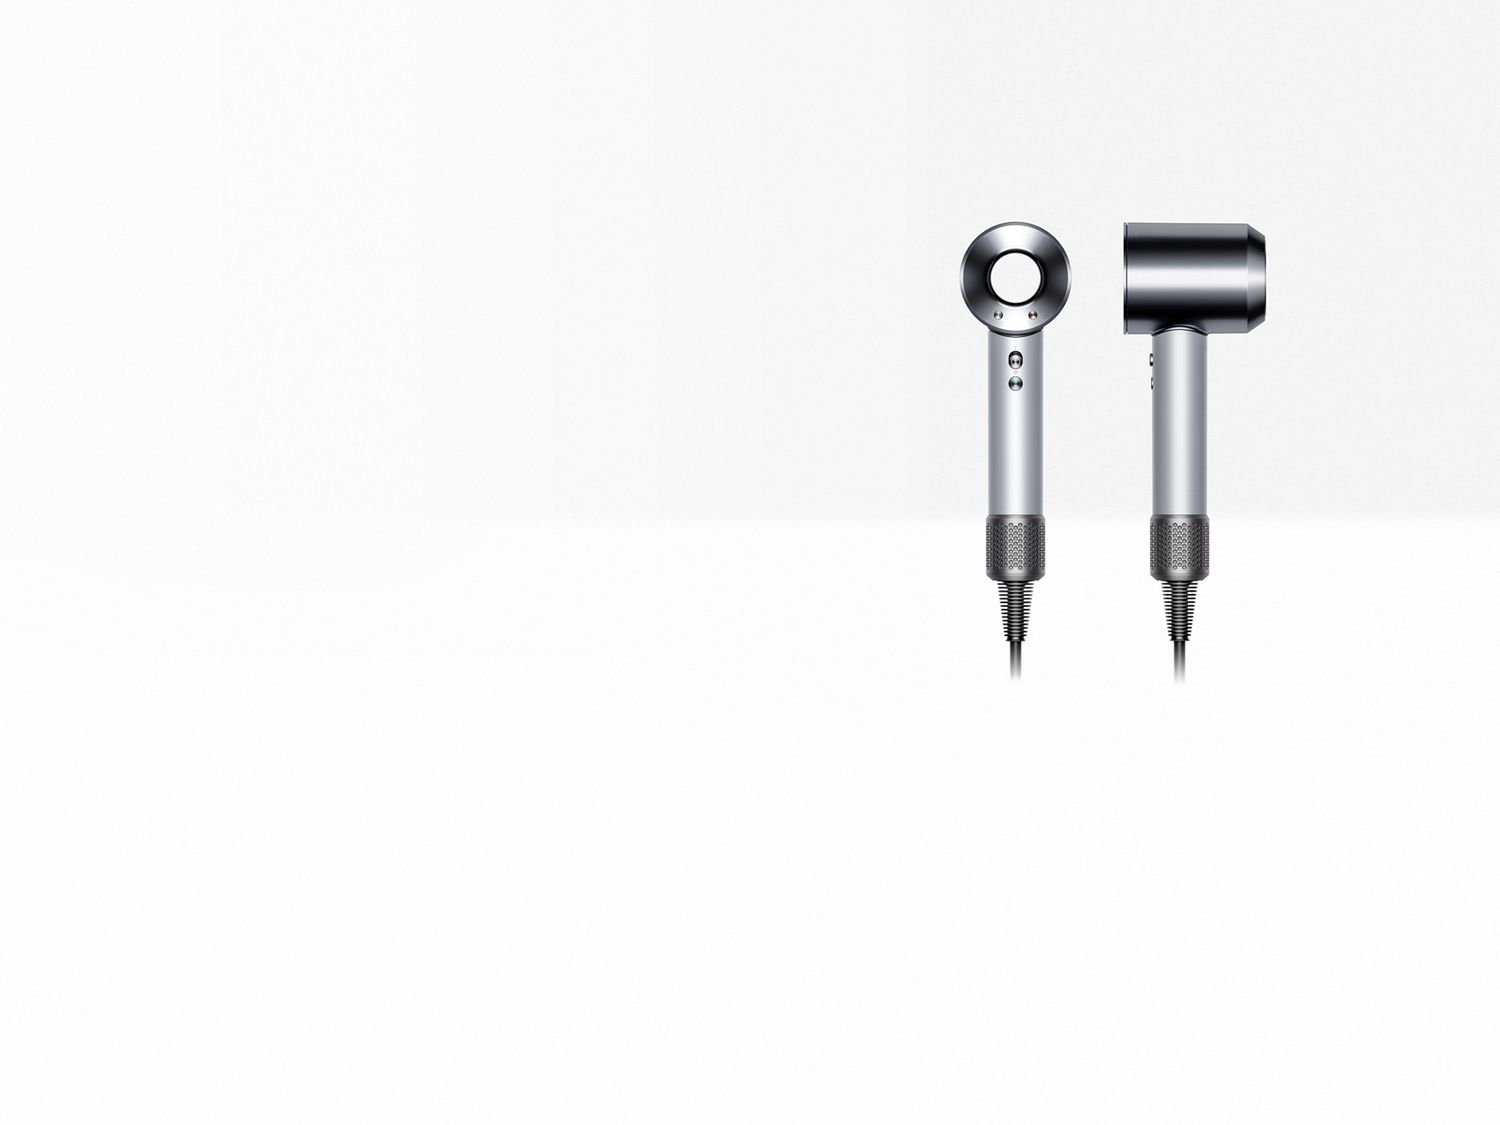 Dyson Supersonic™ professional edition hair dryer